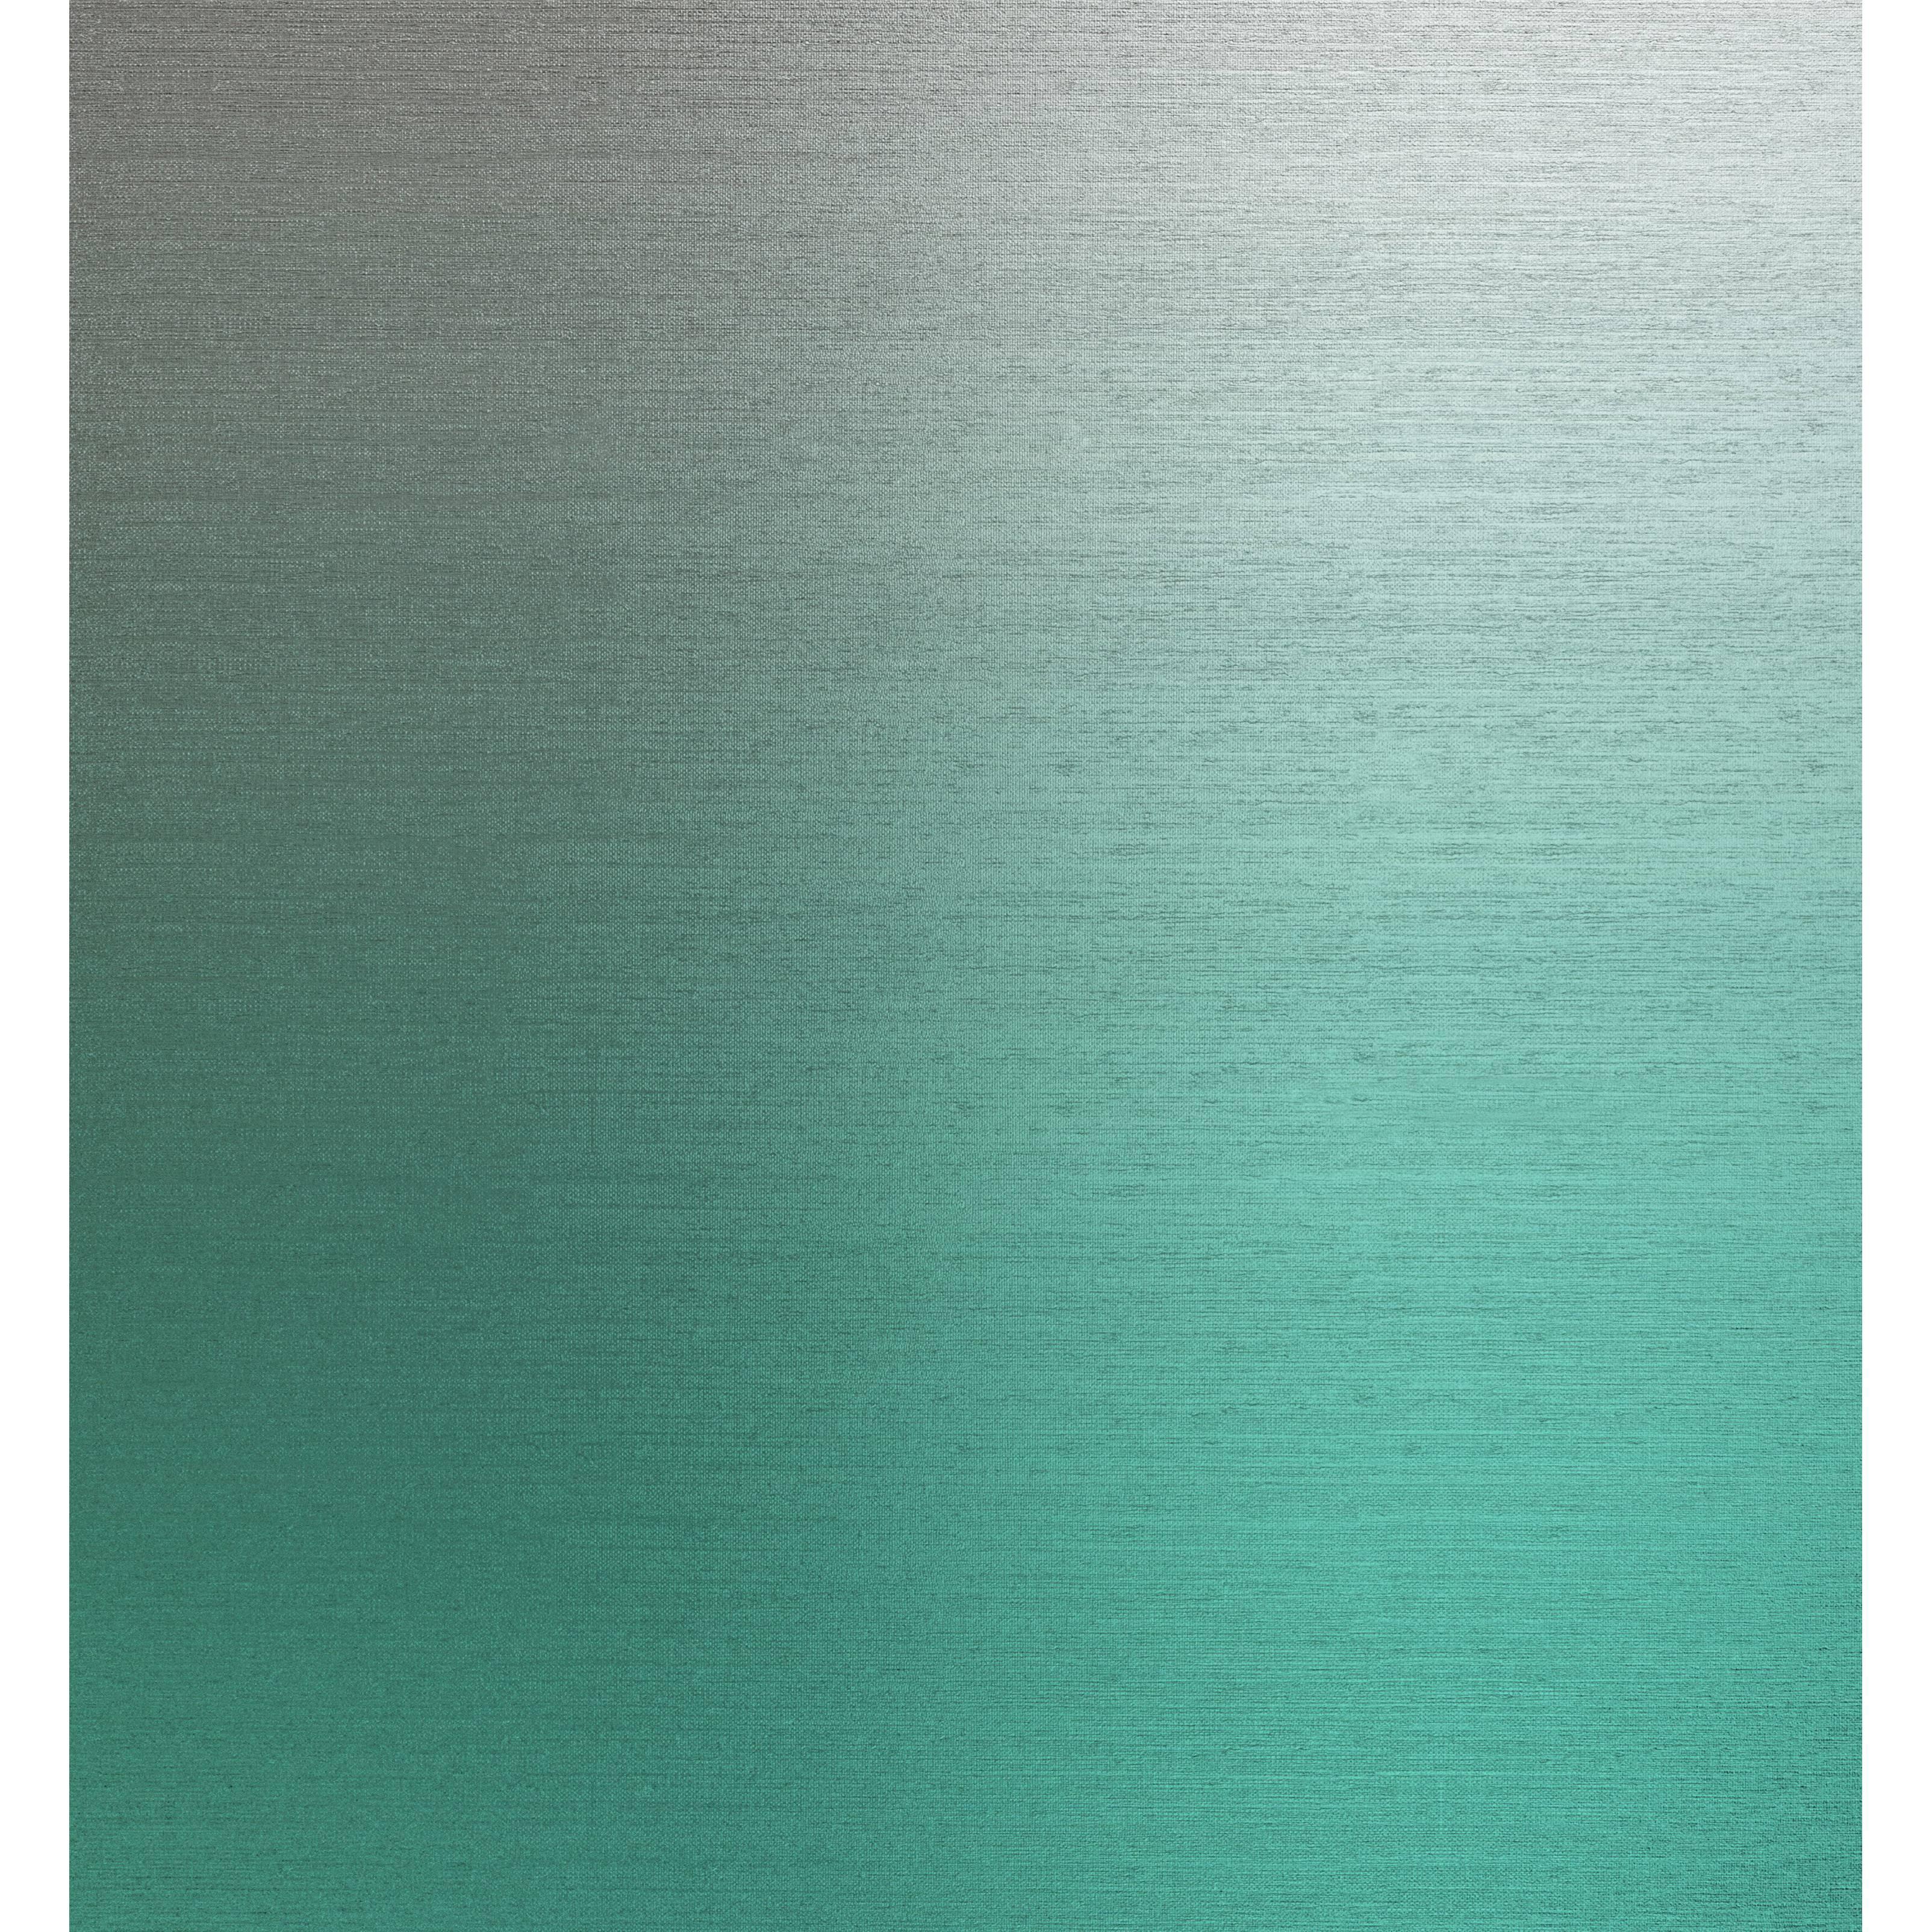 Brasscloth Jade Wallpaper in Green and Textured Silver Metallic, Per Sq. Ft. For Sale